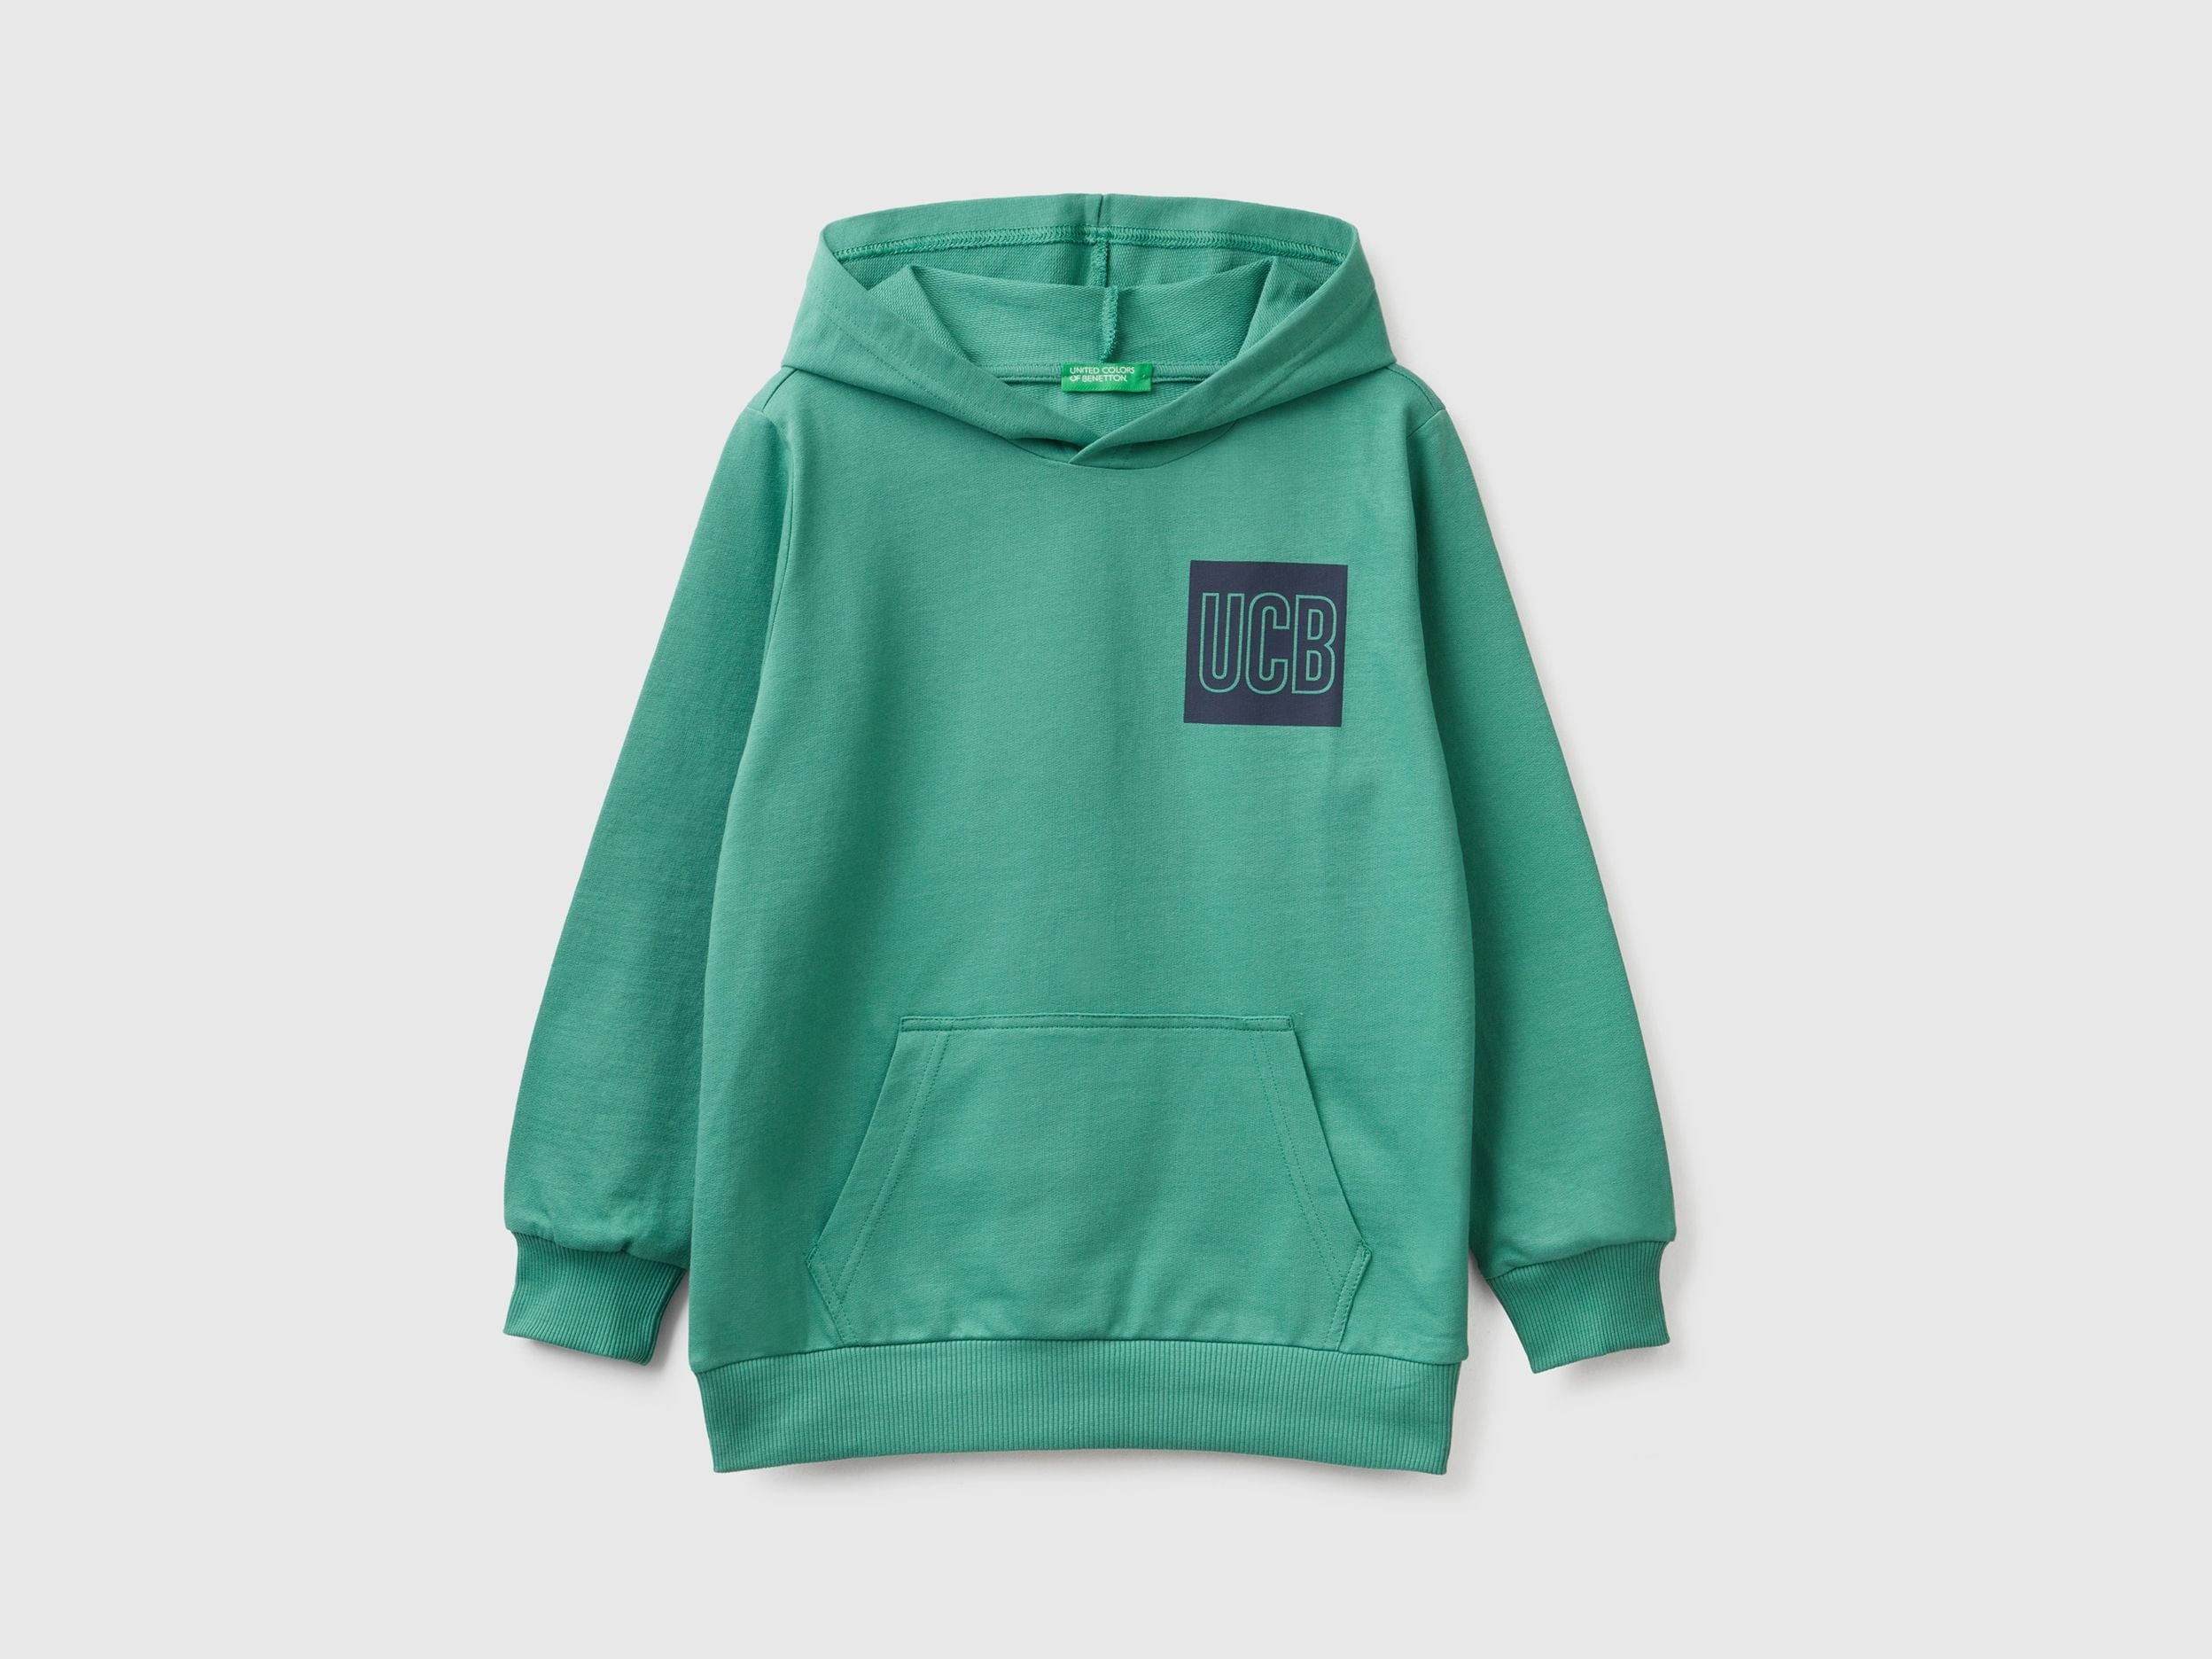 100% cotton hoodie